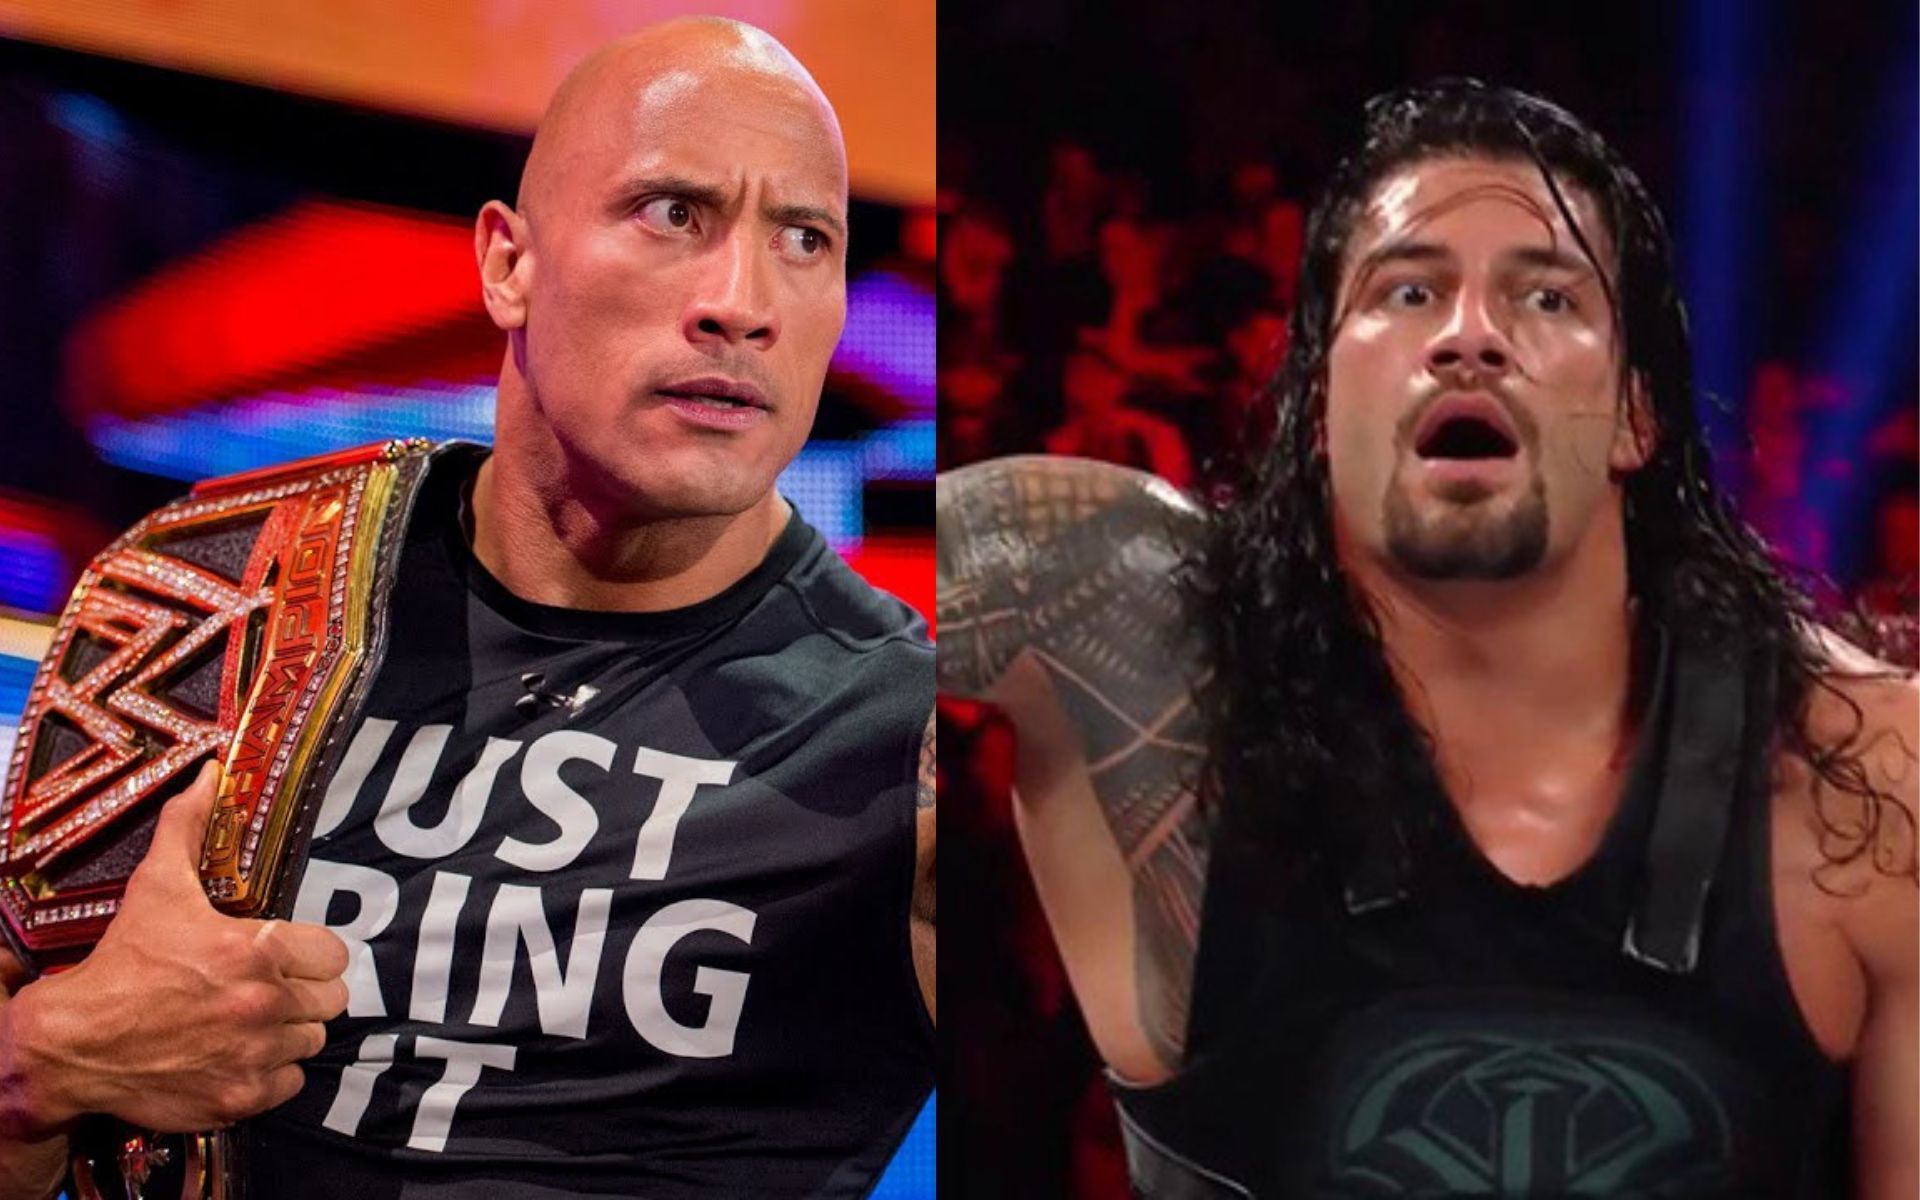 The Rock vs Roman Reigns: The clash of cosuins